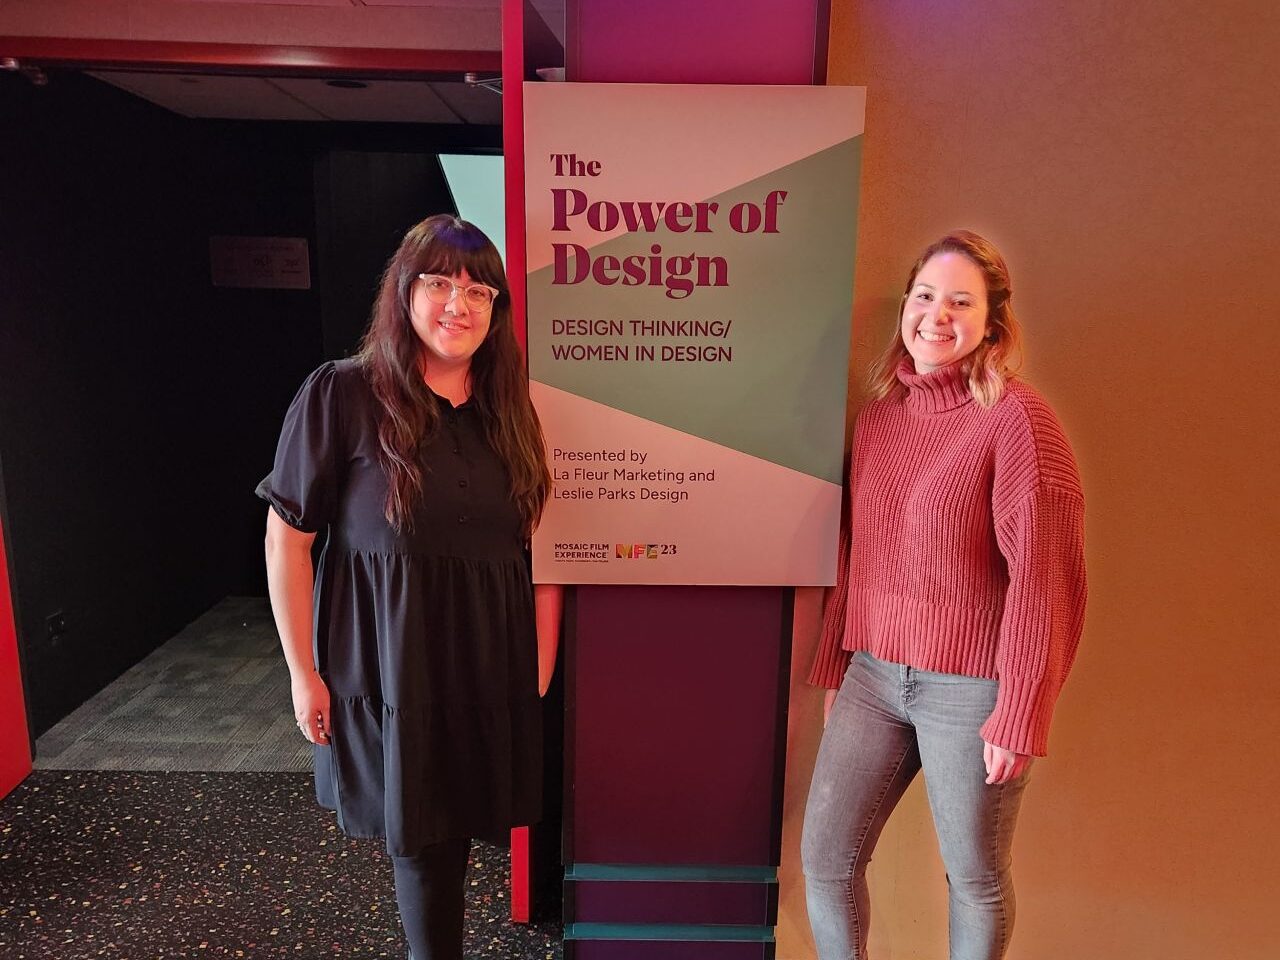 Two women posing next to a sign about the power of design at an event.